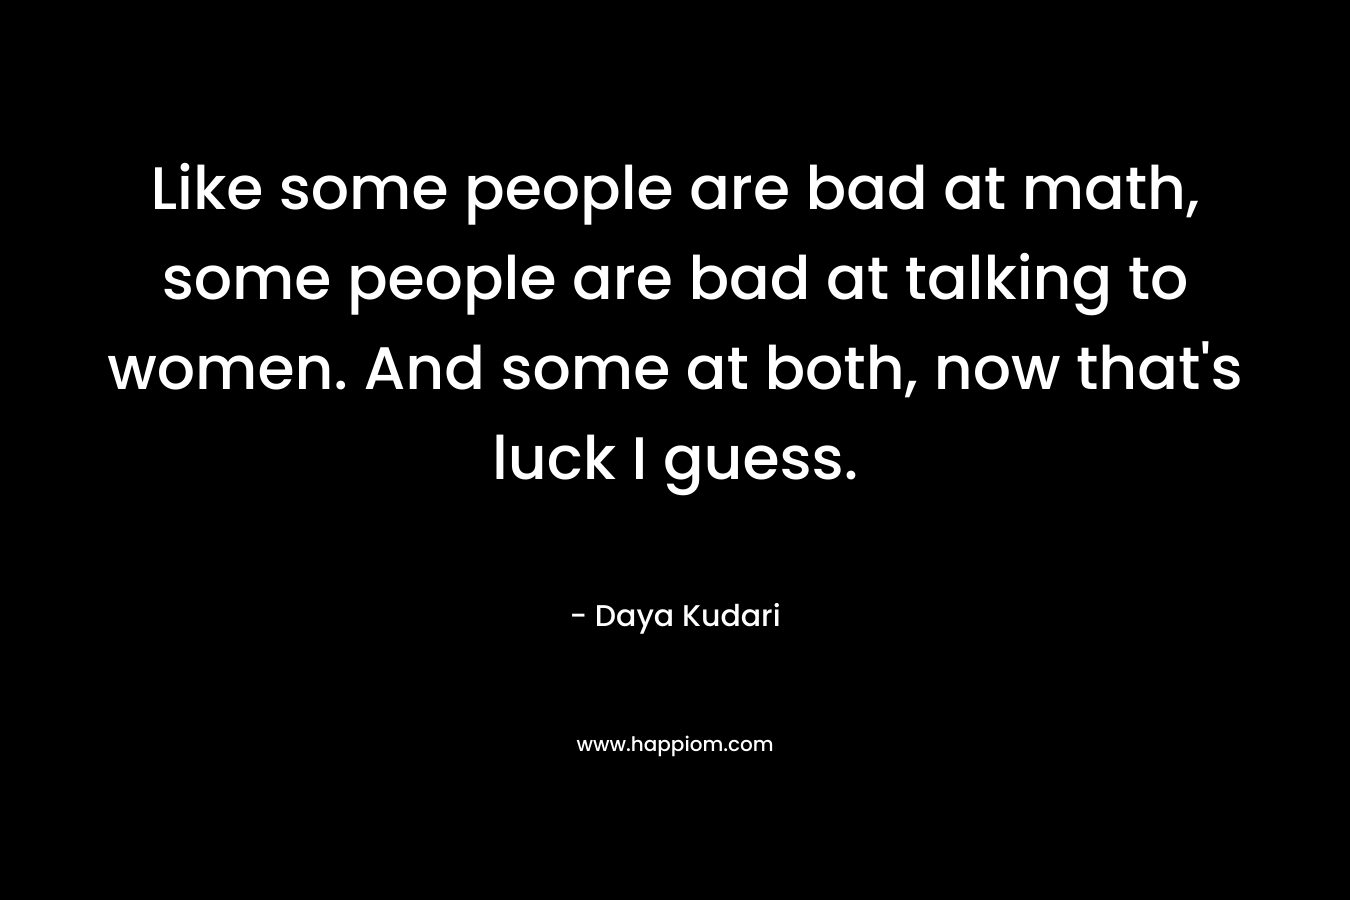 Like some people are bad at math, some people are bad at talking to women. And some at both, now that’s luck I guess. – Daya Kudari